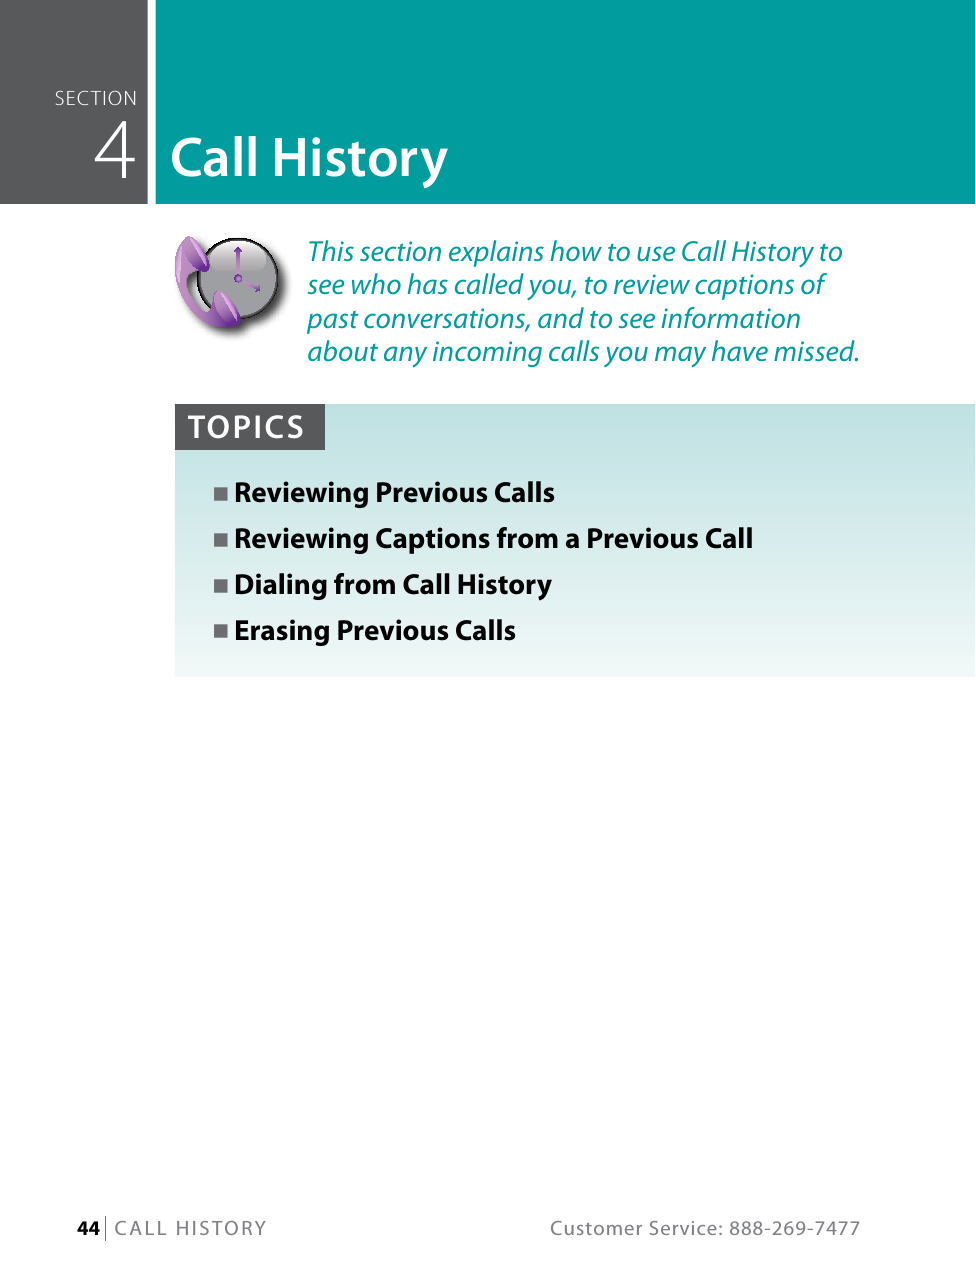 44   CALL HISTORY  Customer Service: 888-269-7477seCTiOn  4Call HistoryTOPICSN Reviewing Previous CallsN Reviewing Captions from a Previous CallN Dialing from Call HistoryN Erasing Previous CallsThis section explains how to use Call History to see who has called you, to review captions of past conversations, and to see information about any incoming calls you may have missed.